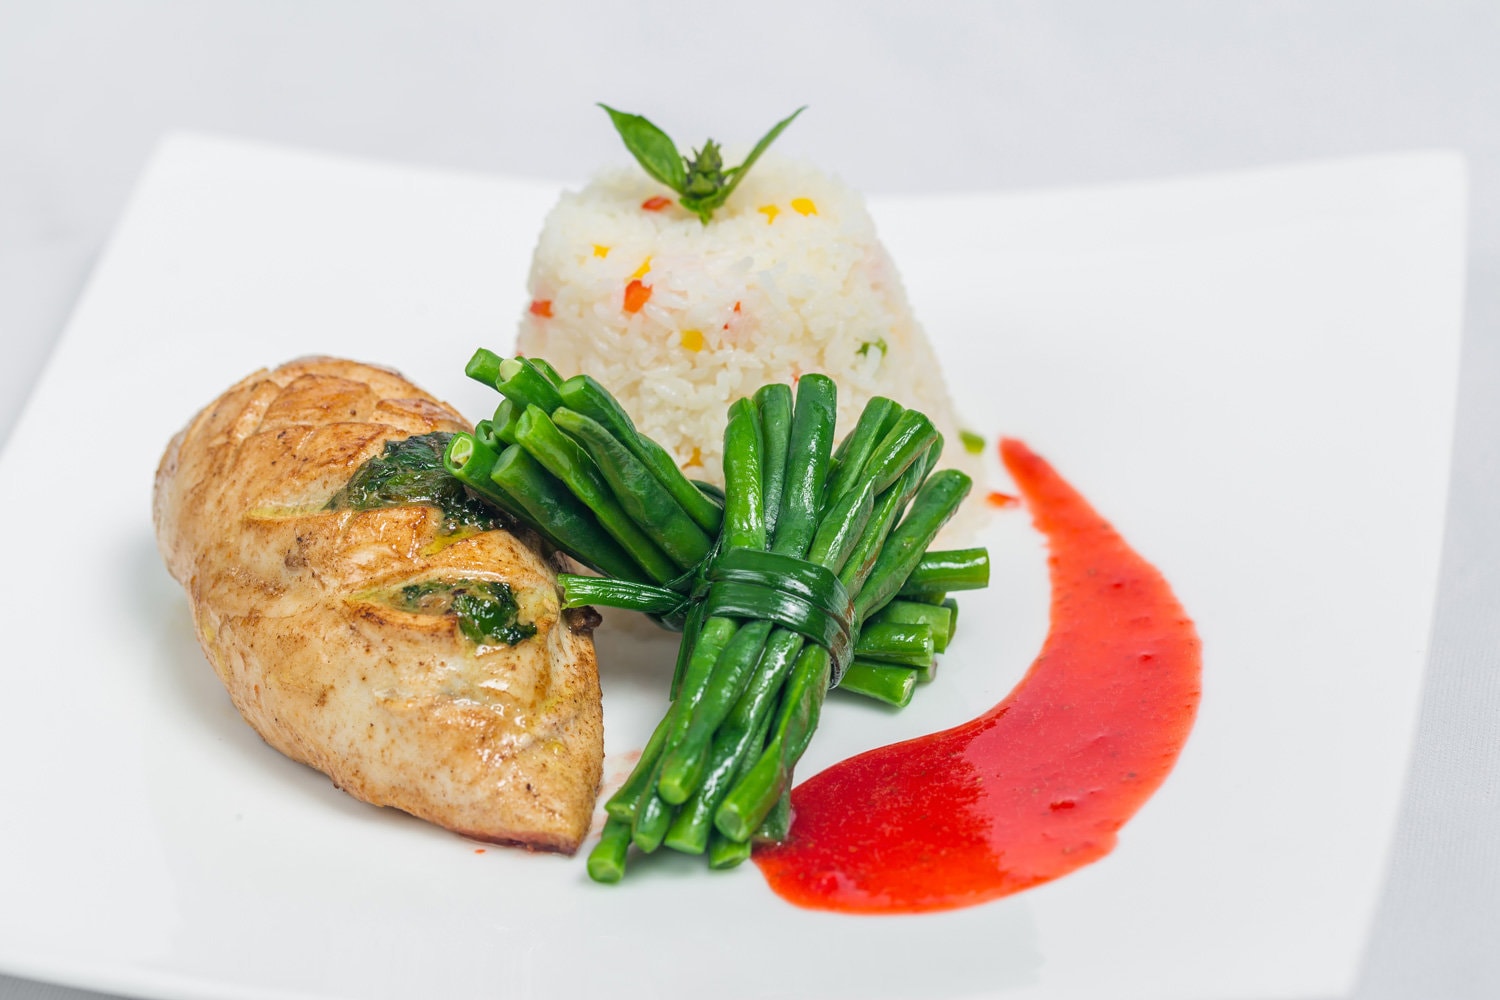 Pan roasted chicken breast with long green beans and light vegetable rice platter. Food decorating with red sauce on a white plate. Isolated white background.